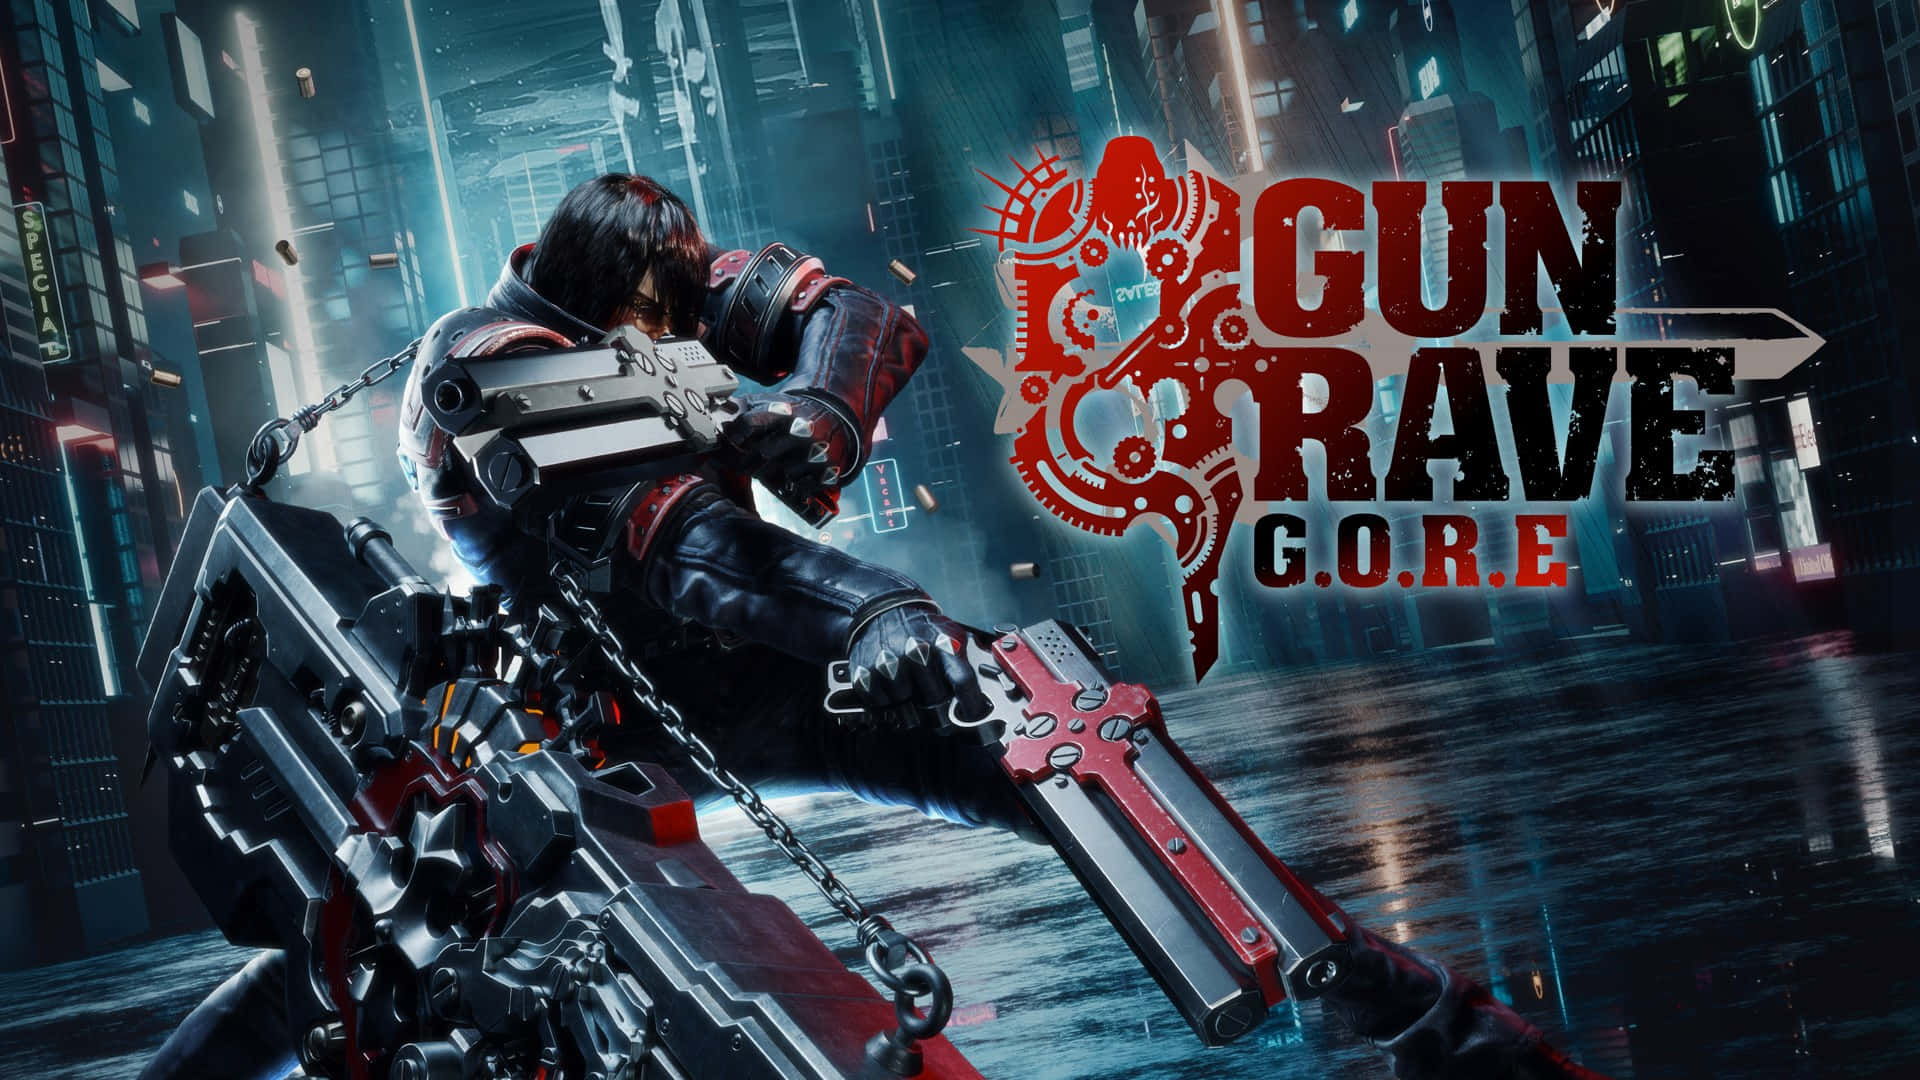 Enjoy the zombie-slaying action with Gungrave Wallpaper